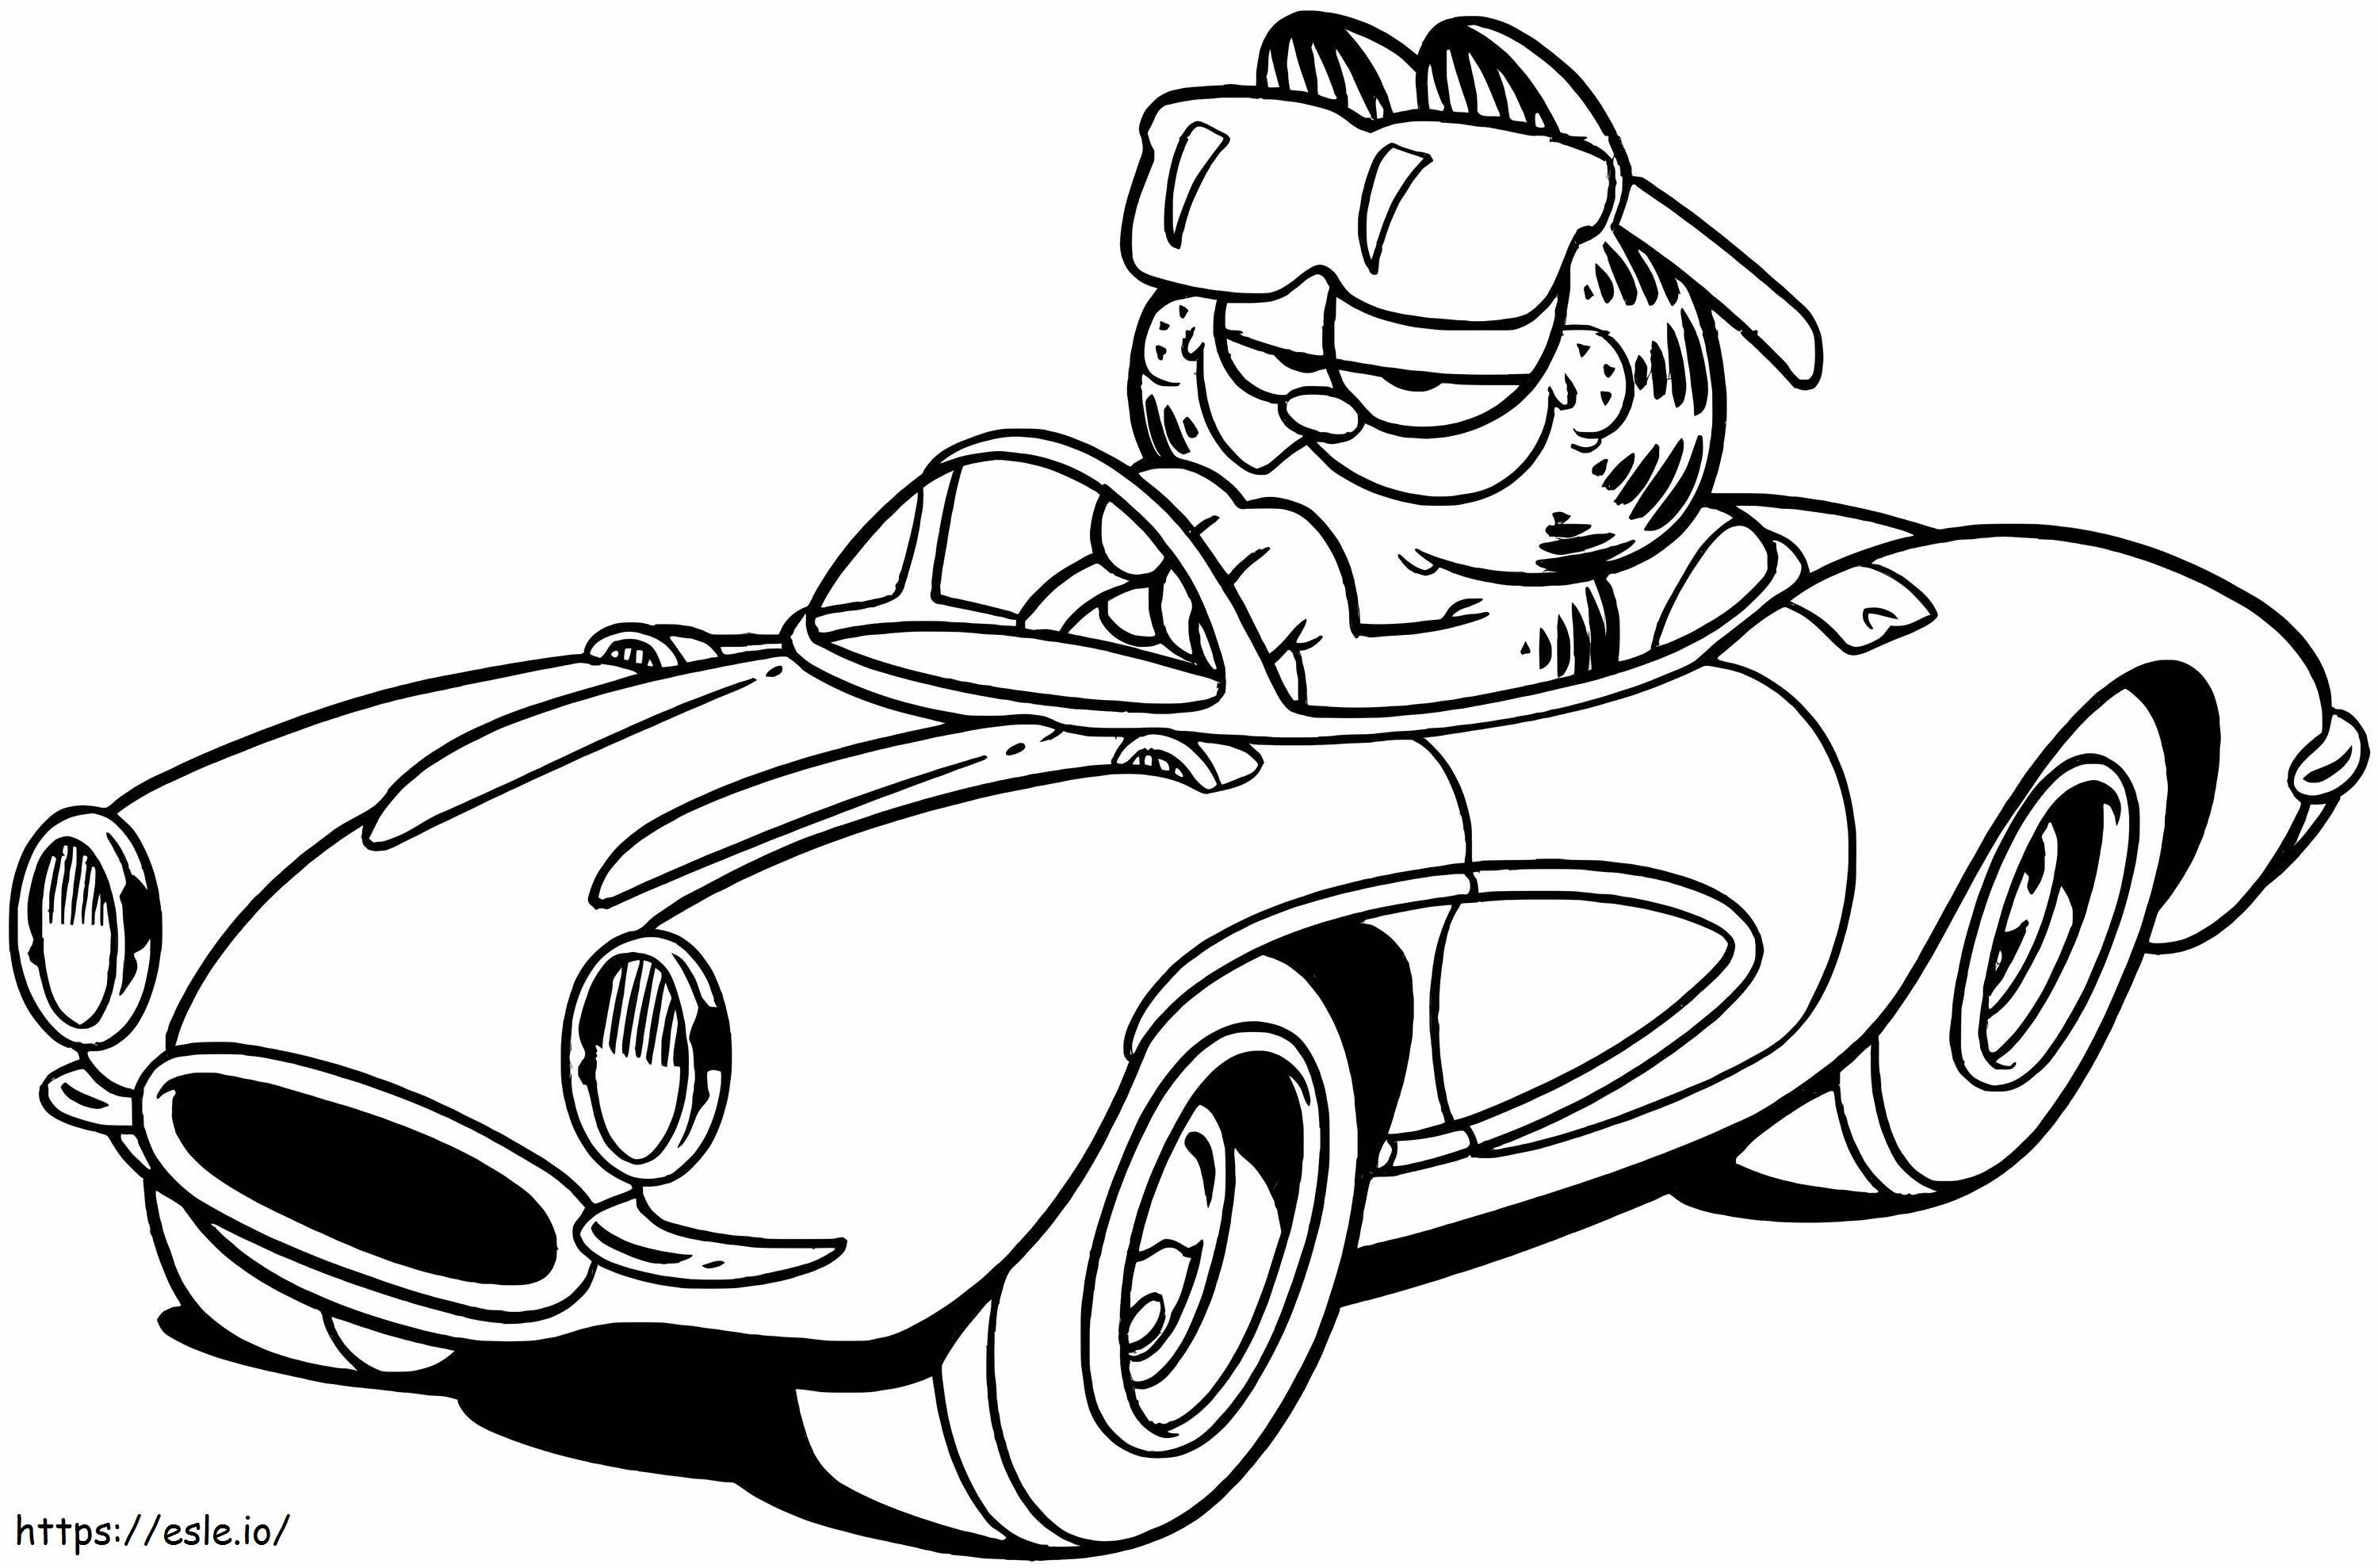 Garfield In The Car coloring page